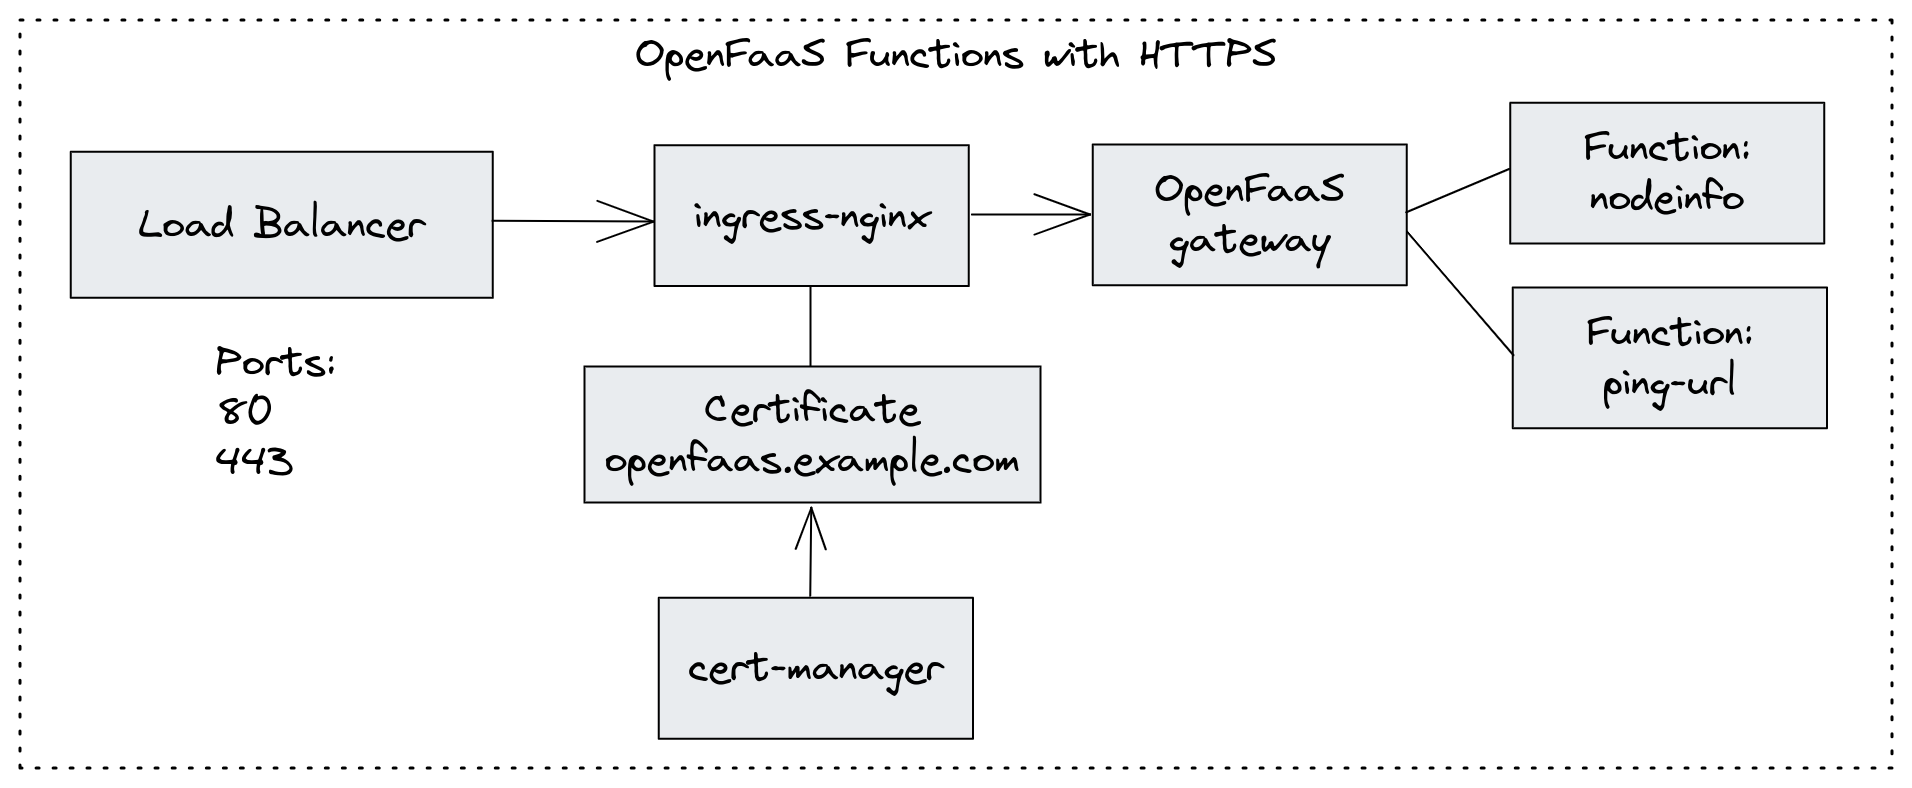 Conceptual architecture for OpenFaaS control-plane